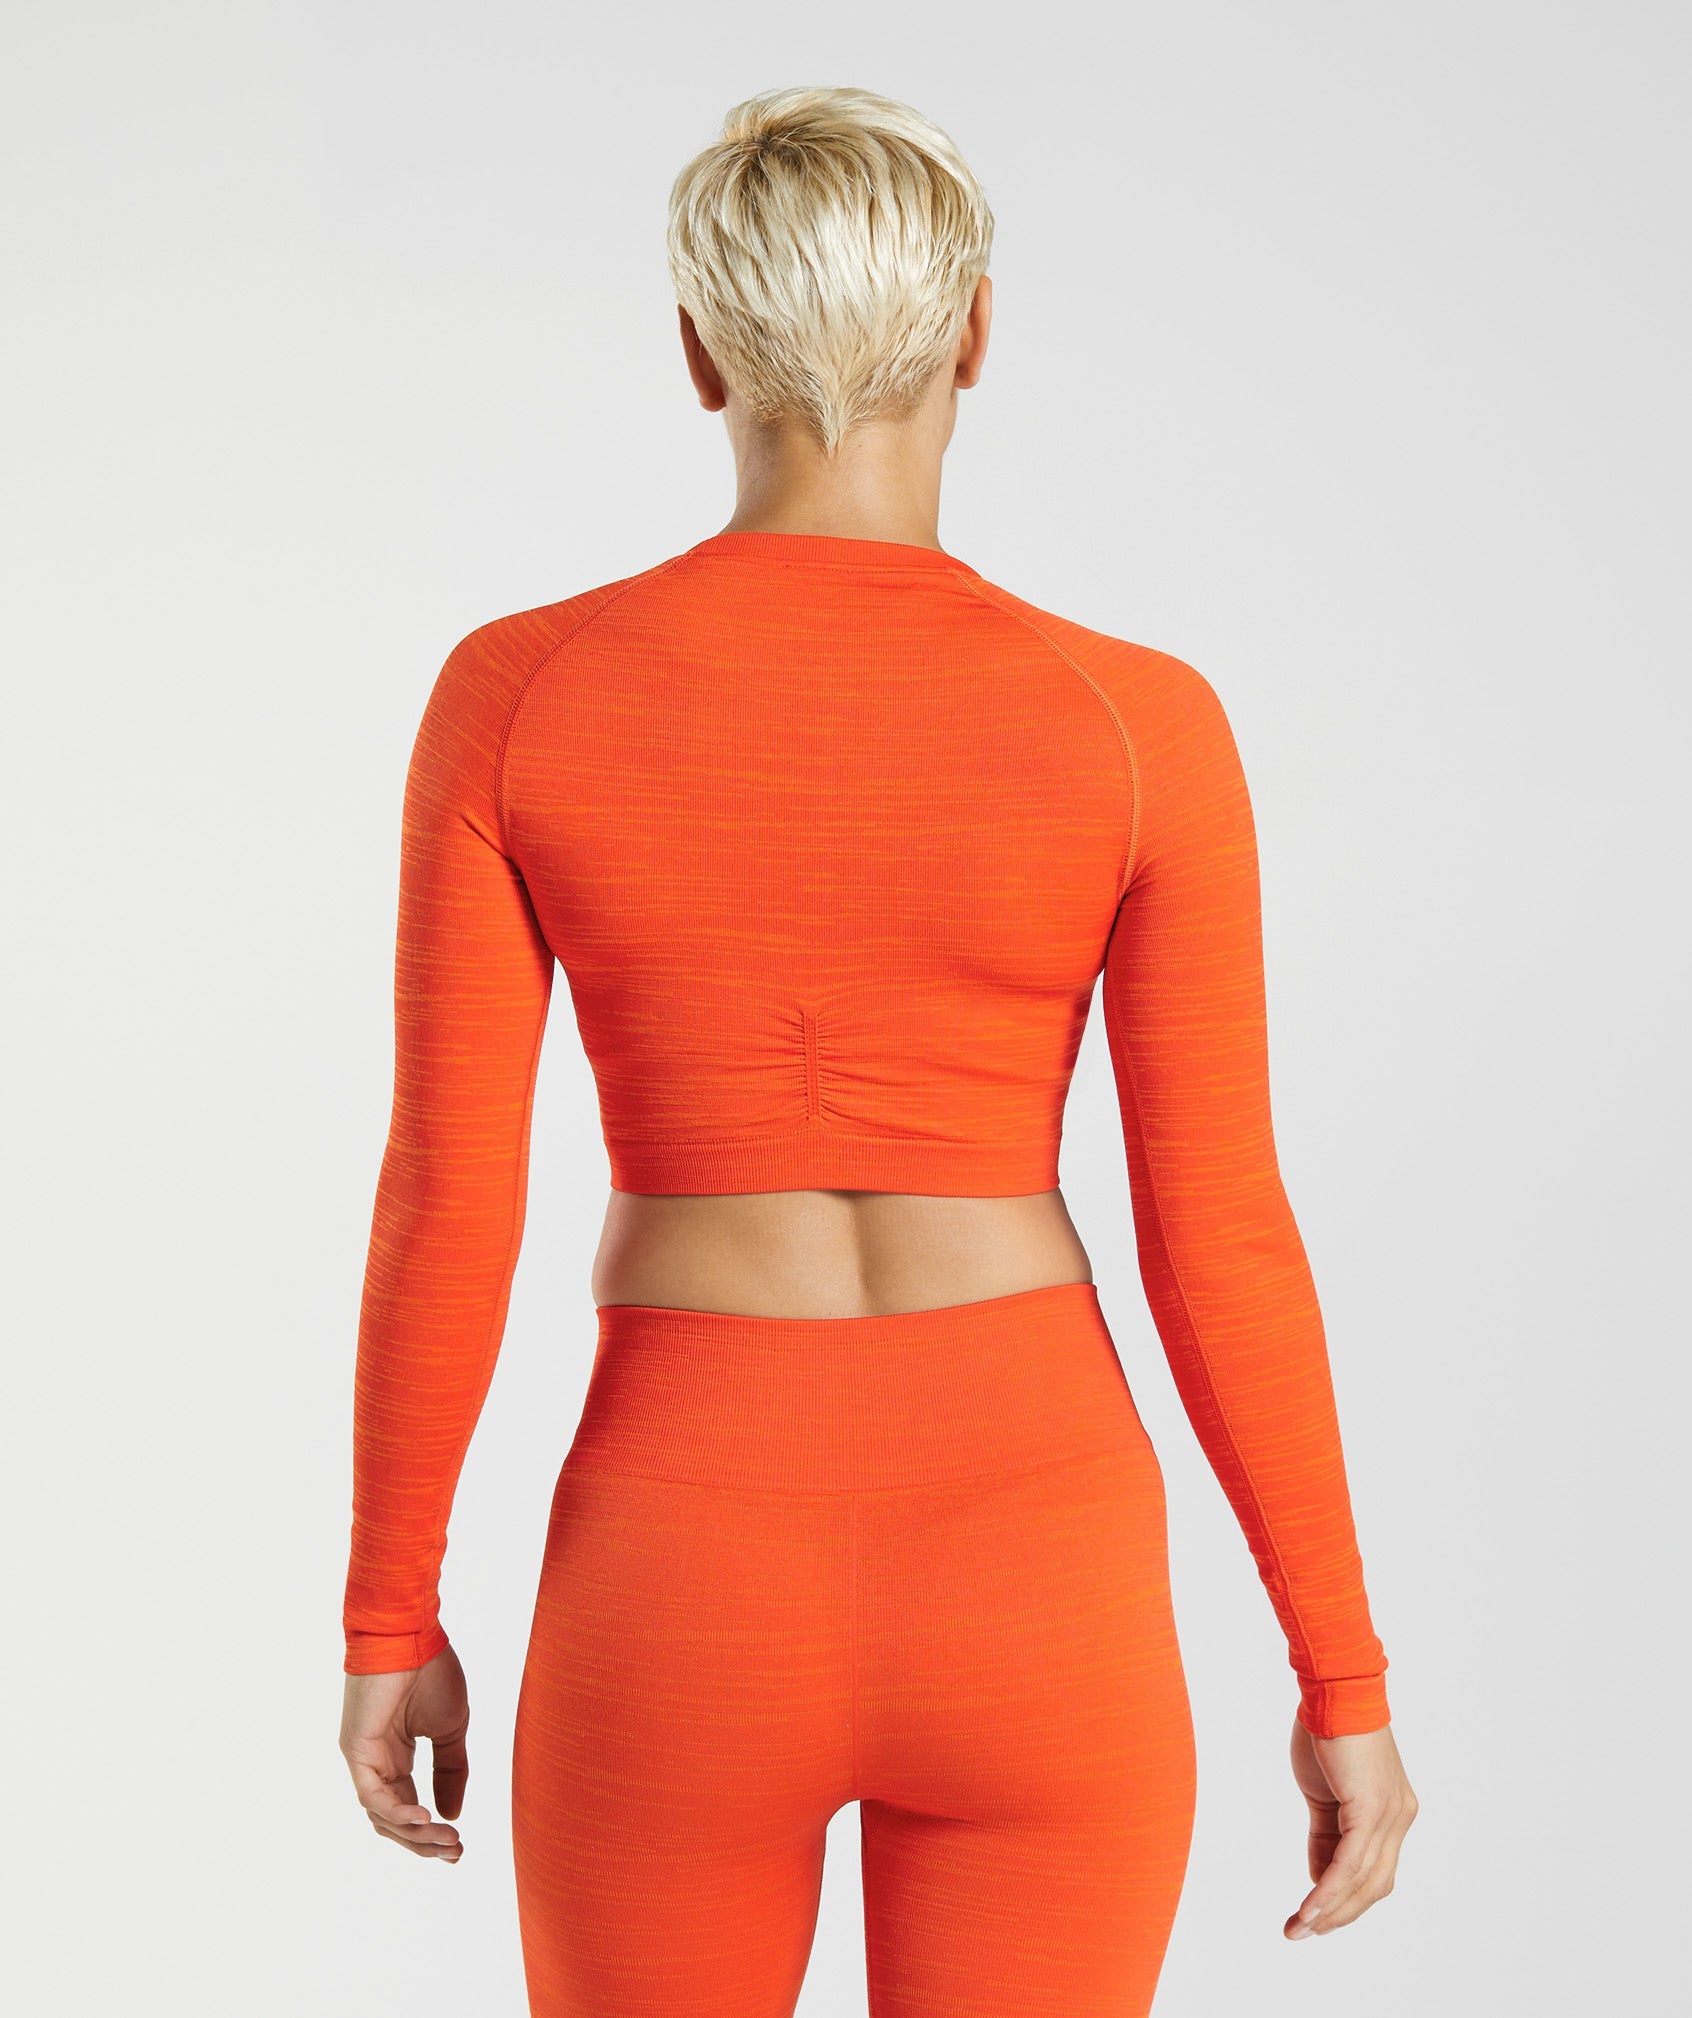 SOLD gymshark set! 🍊🦈 . . . orange gymshark long sleeve top and matching  leggings! cute matching details on both the top and leggi